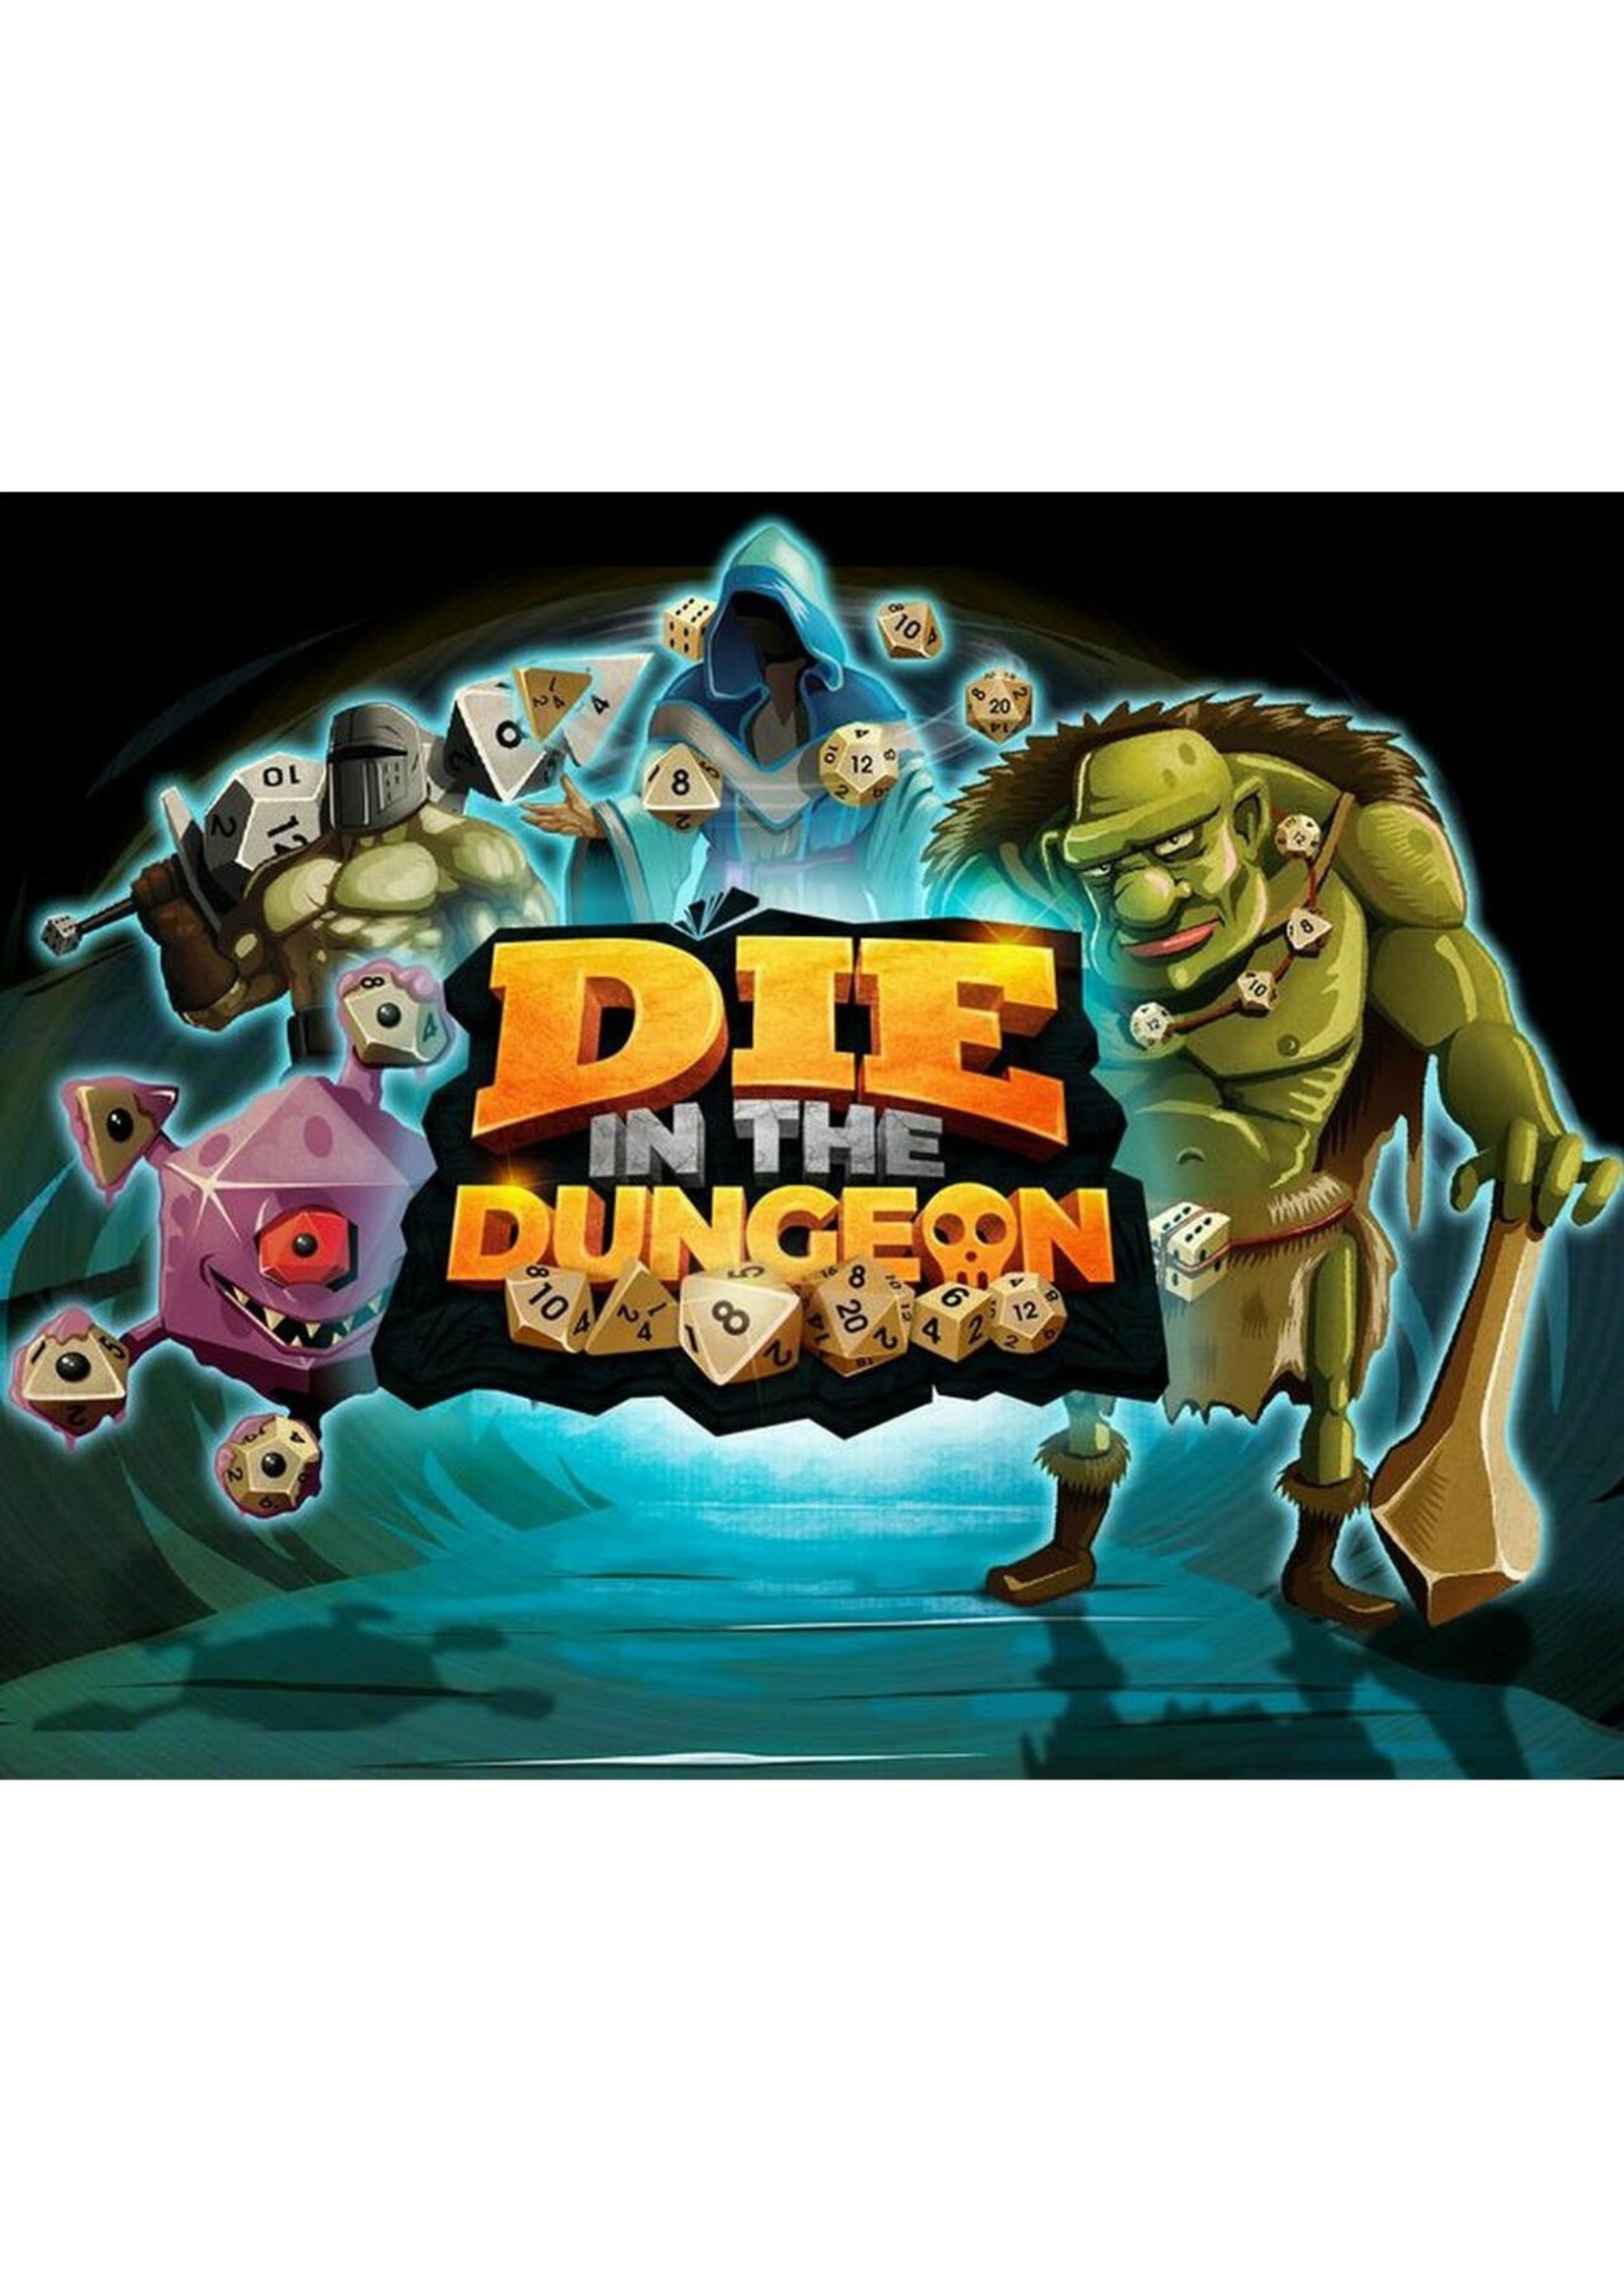 DIE! in the Dungeon